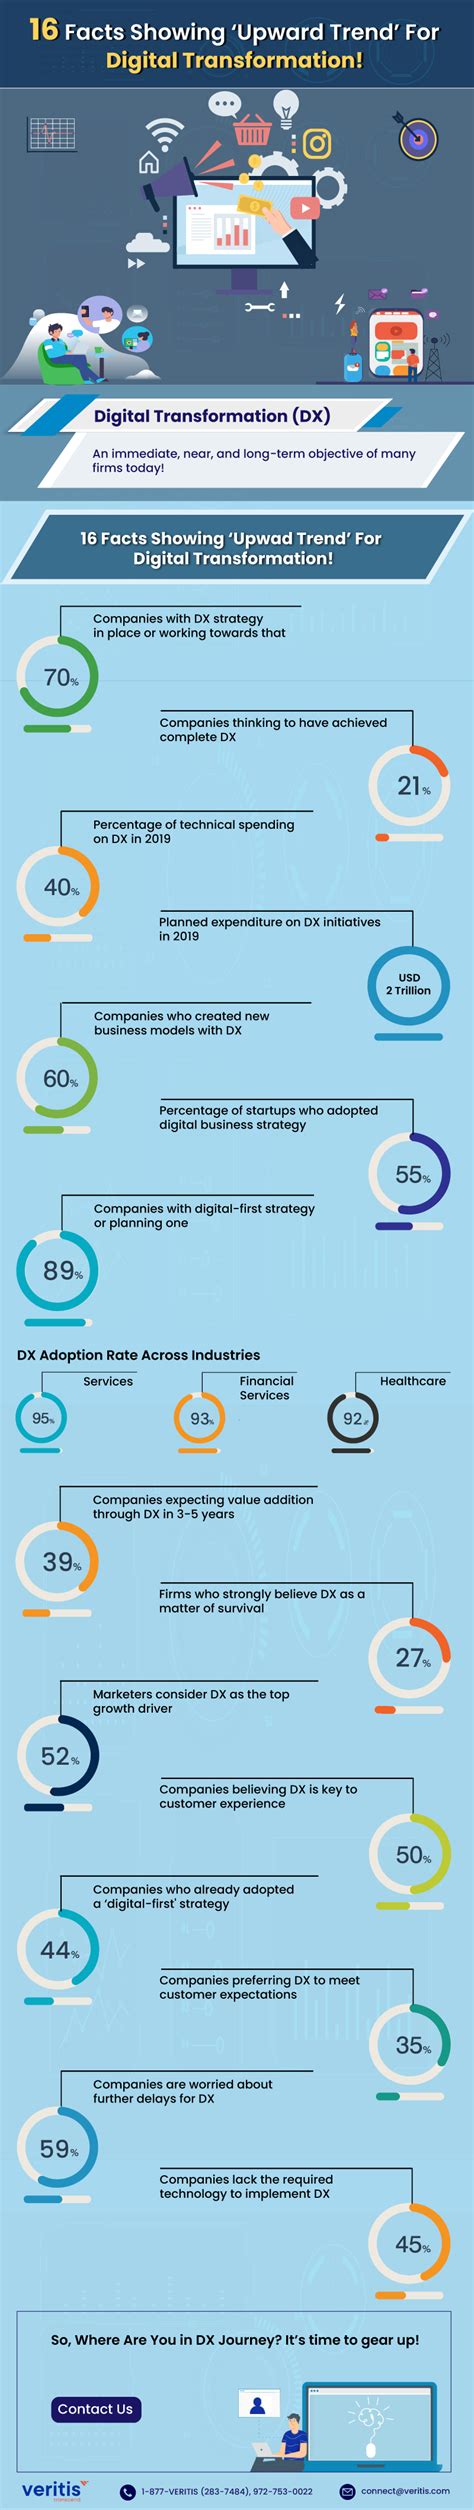 Infographic 16 Facts ‘upward Trend For Digital Transformation